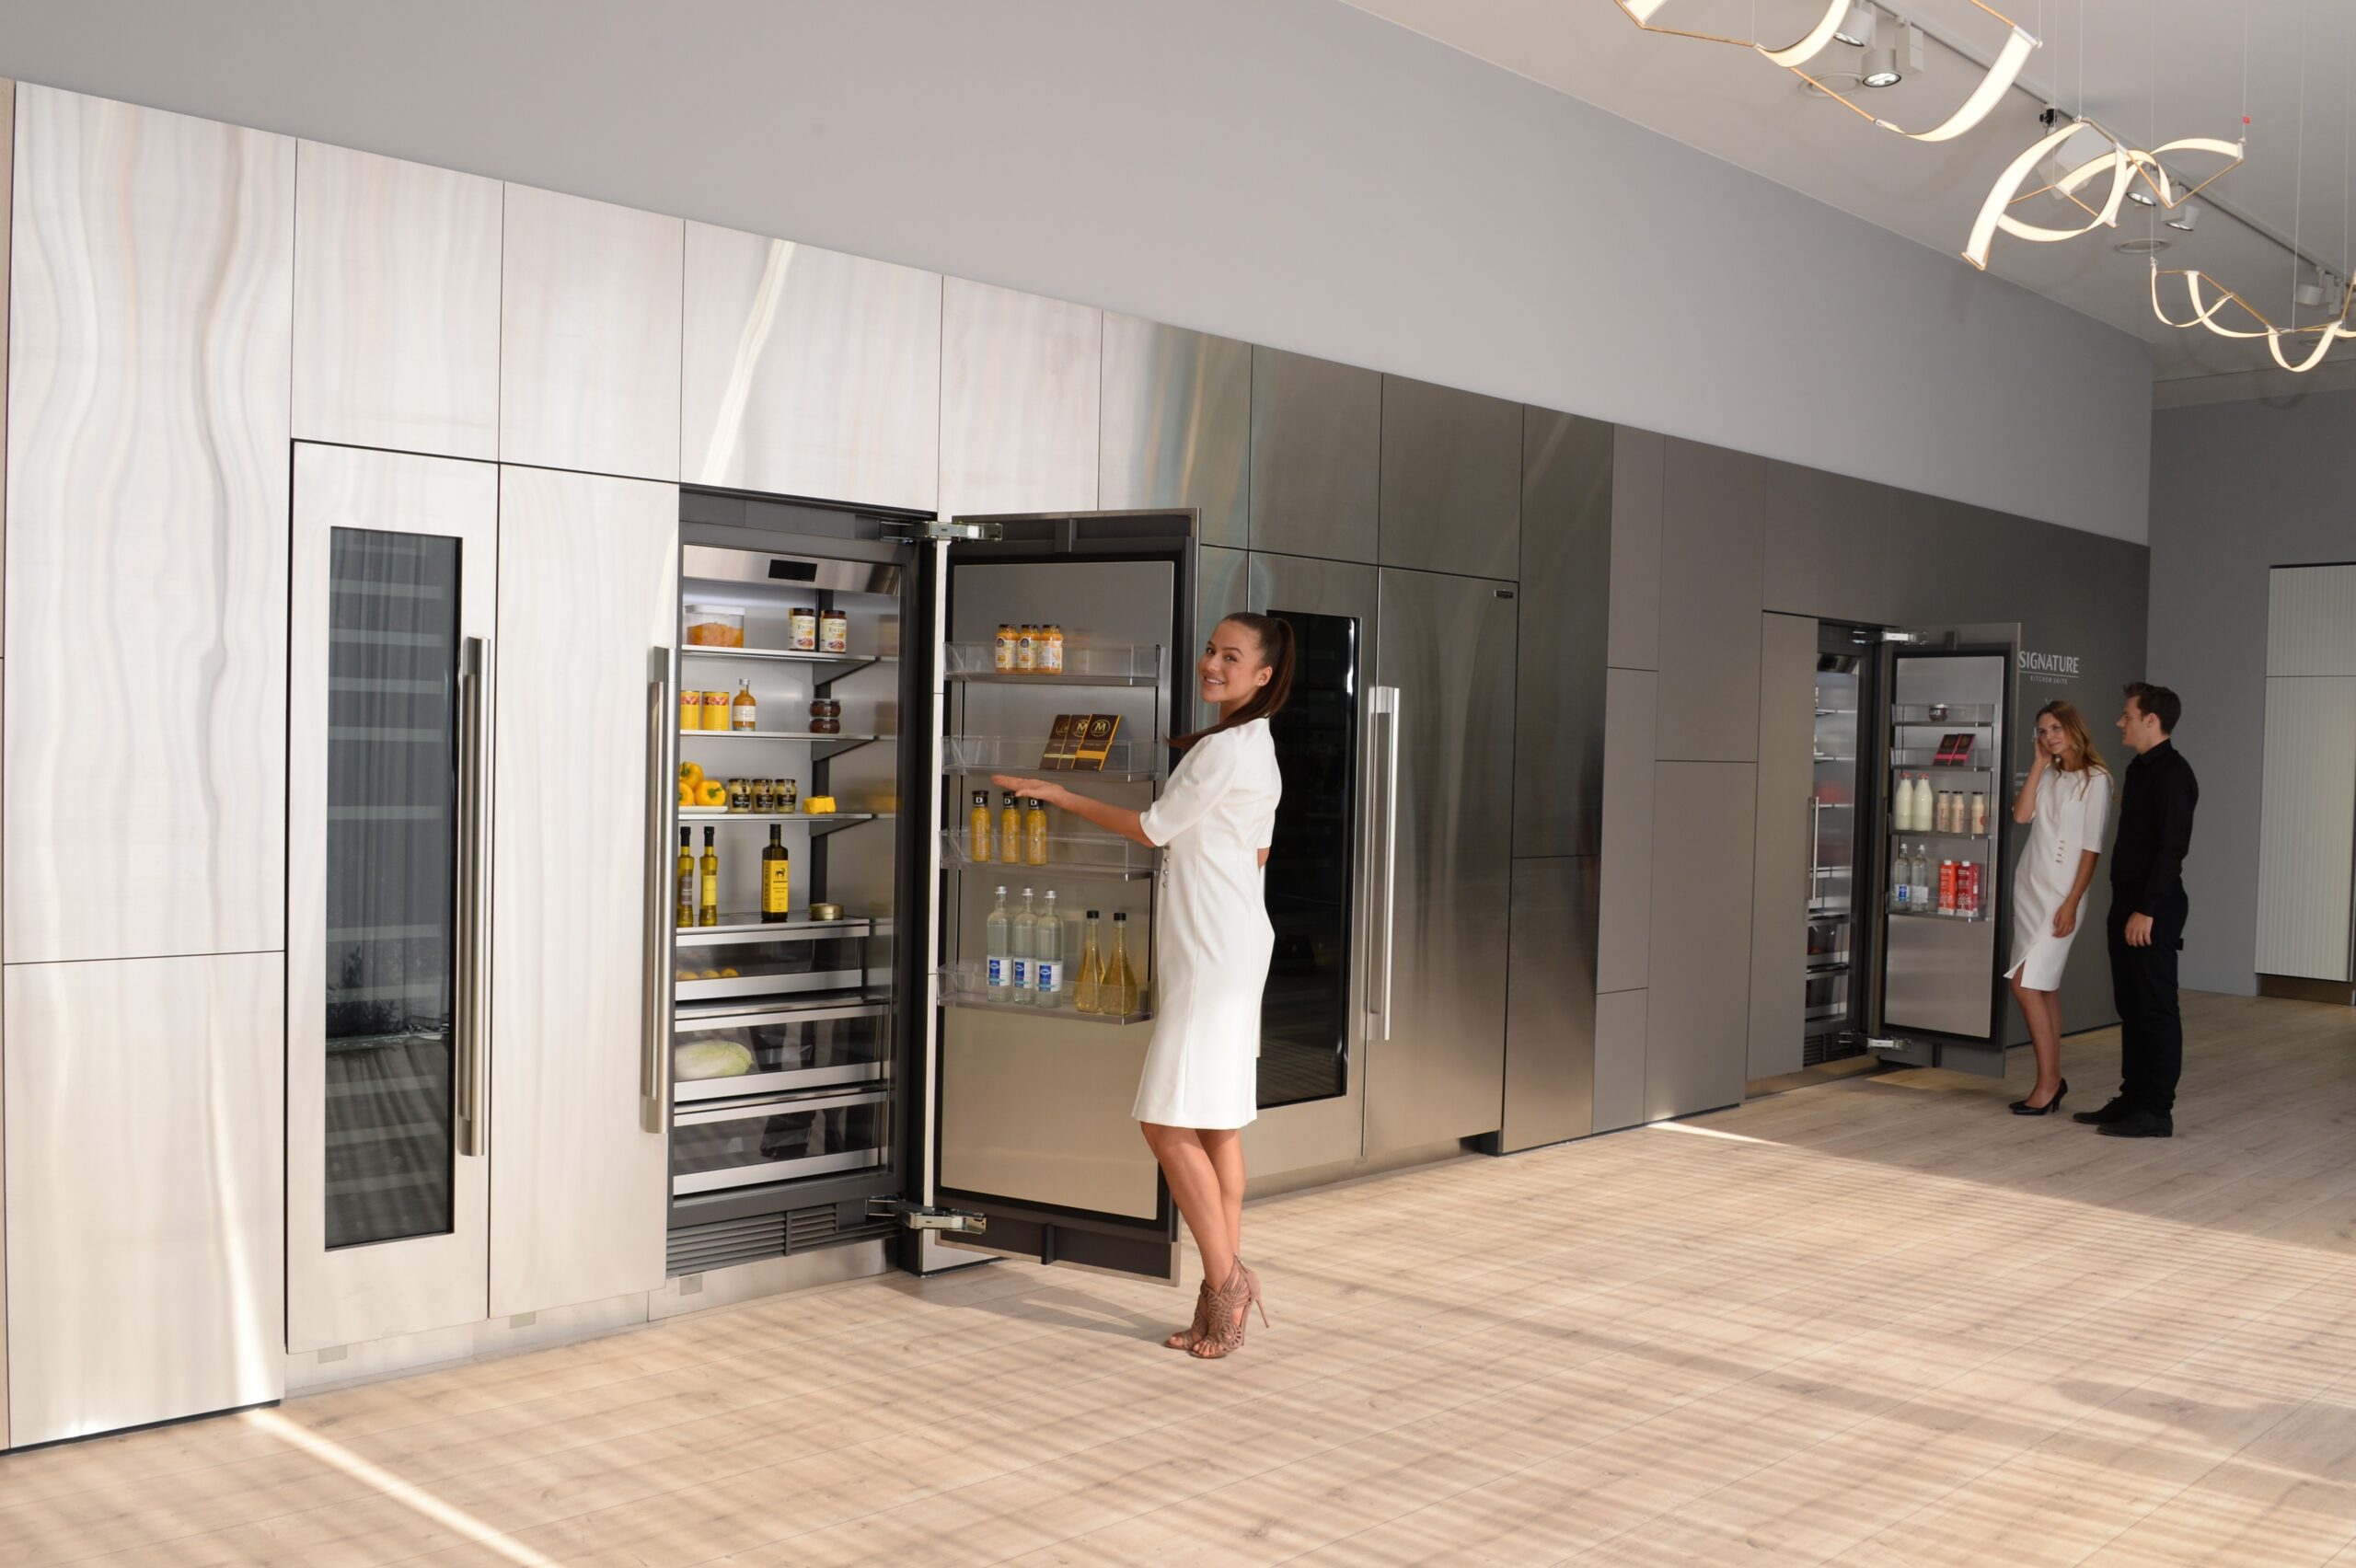 A close view of a refrigerator in the LG Signature Kitchen Suite display zone, a model is opening the fridge door.